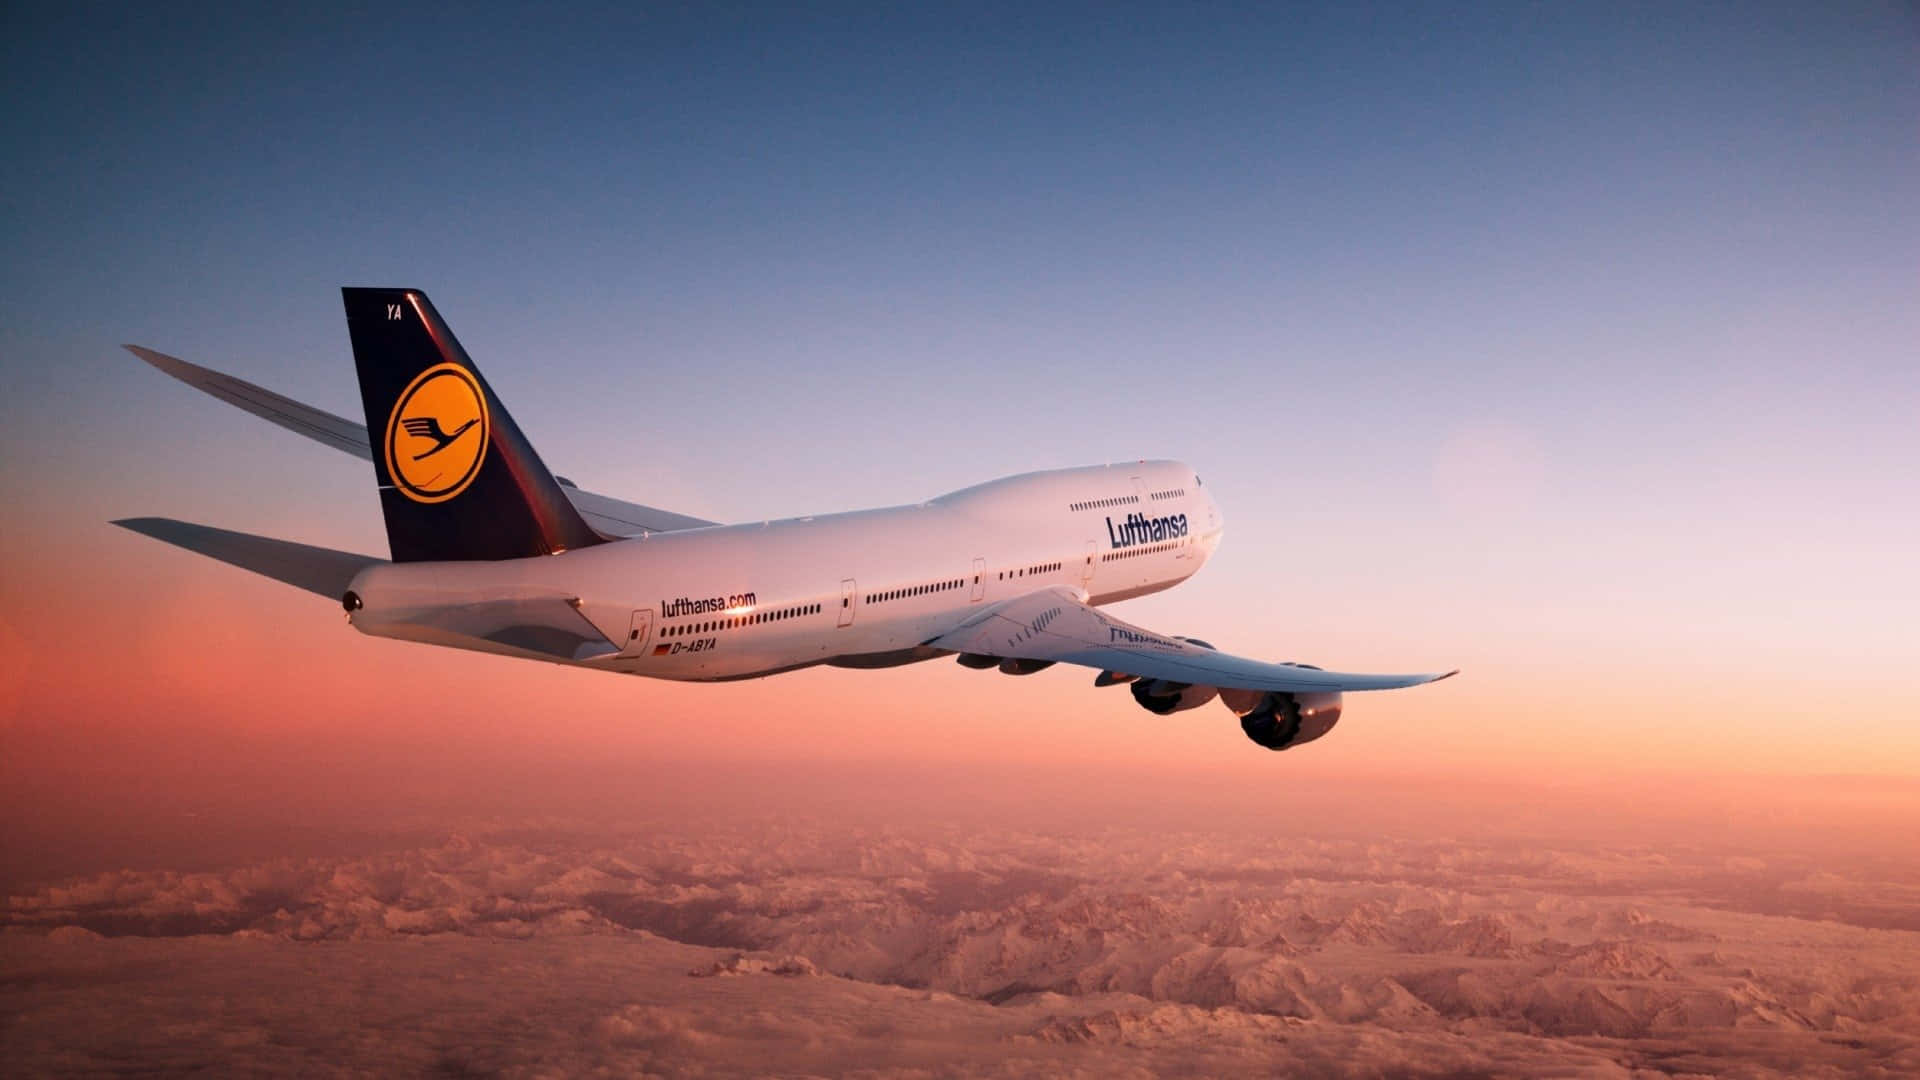 The Majestic 747 Airplane Soaring in the Skies Wallpaper